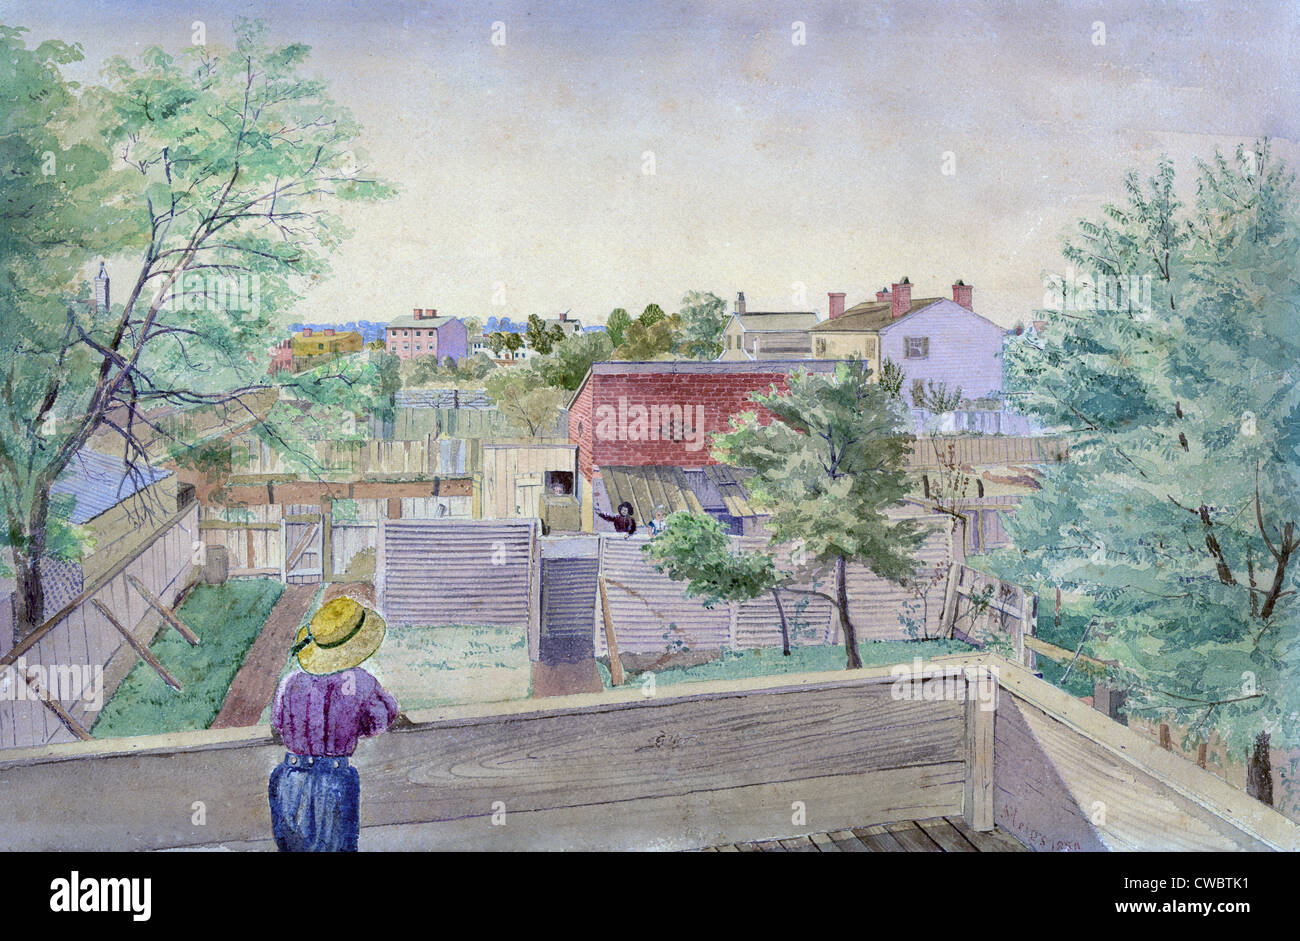 Washington, D.C., overlooking the backyard and adjacent neighborhood, and showing children standing on balconies. Watercolor by Stock Photo